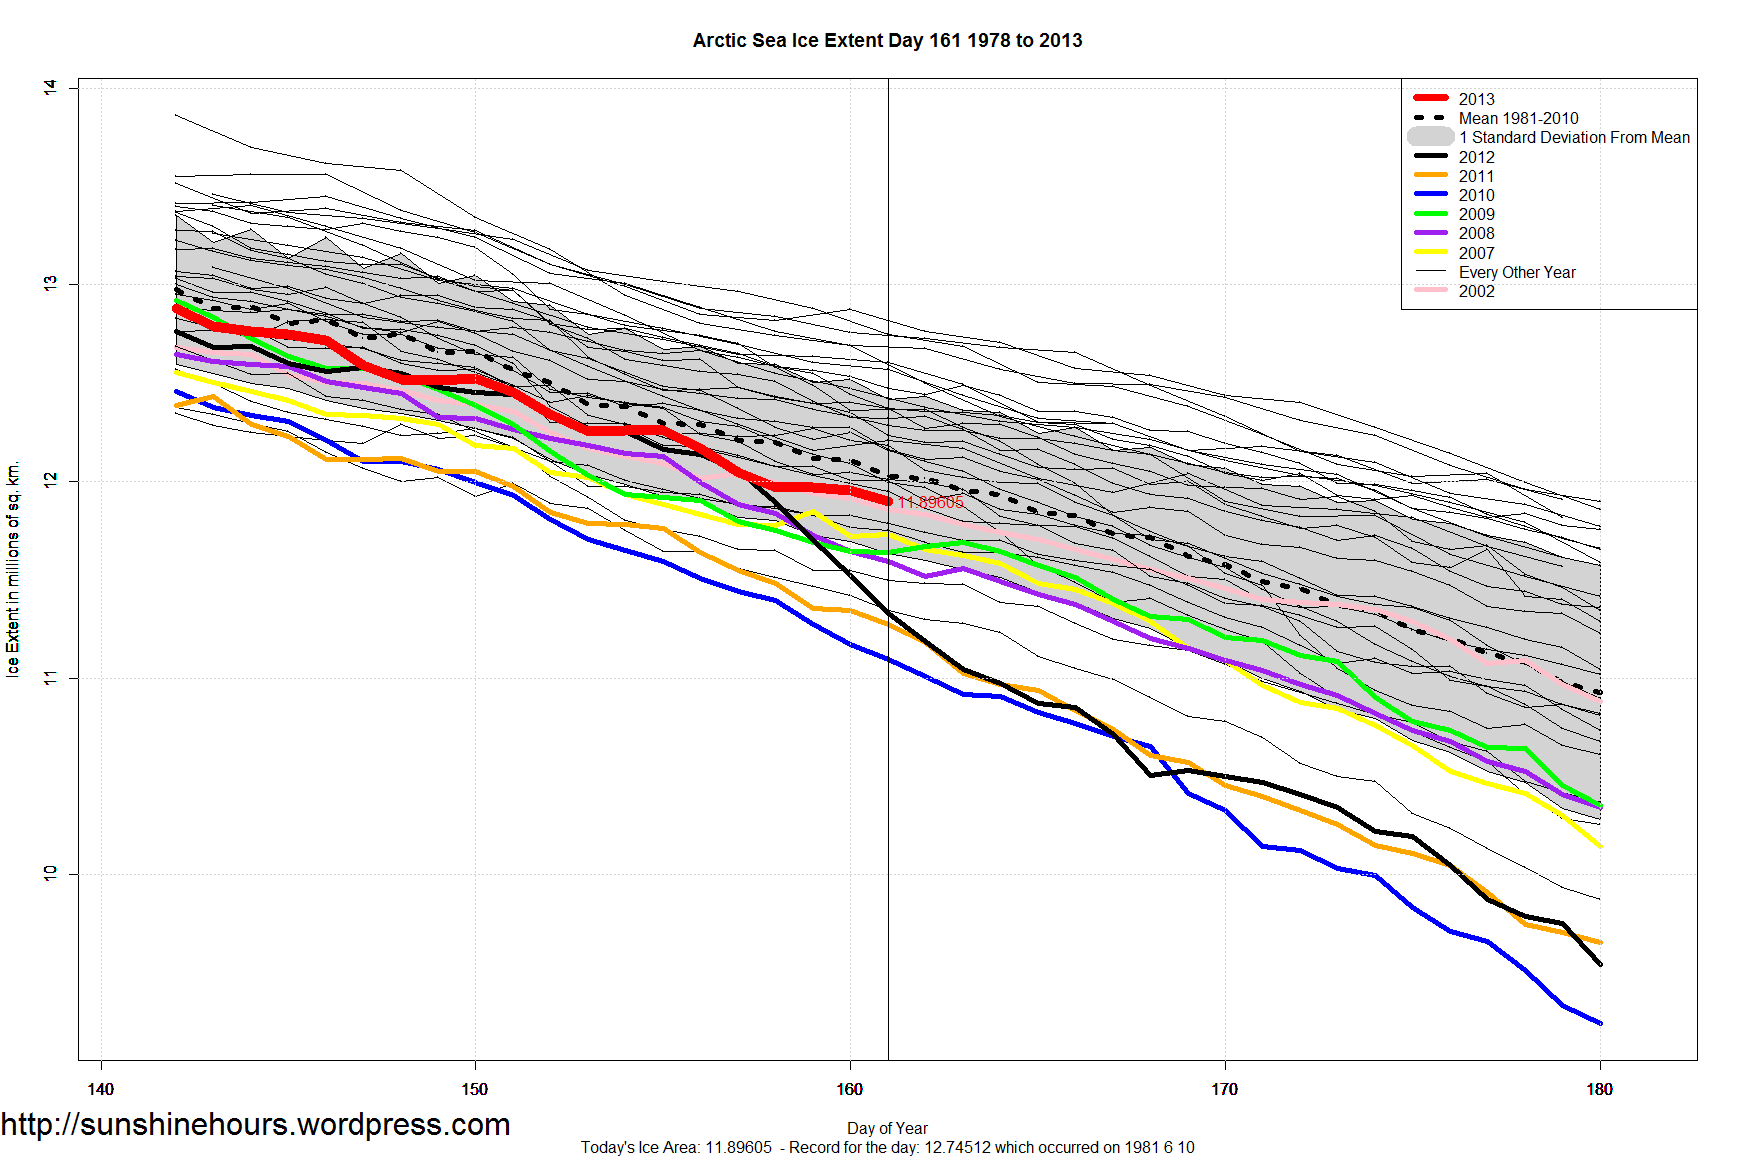 Arctic_Sea_Ice_Extent_Zoomed_2013_Day_161_1981-2010